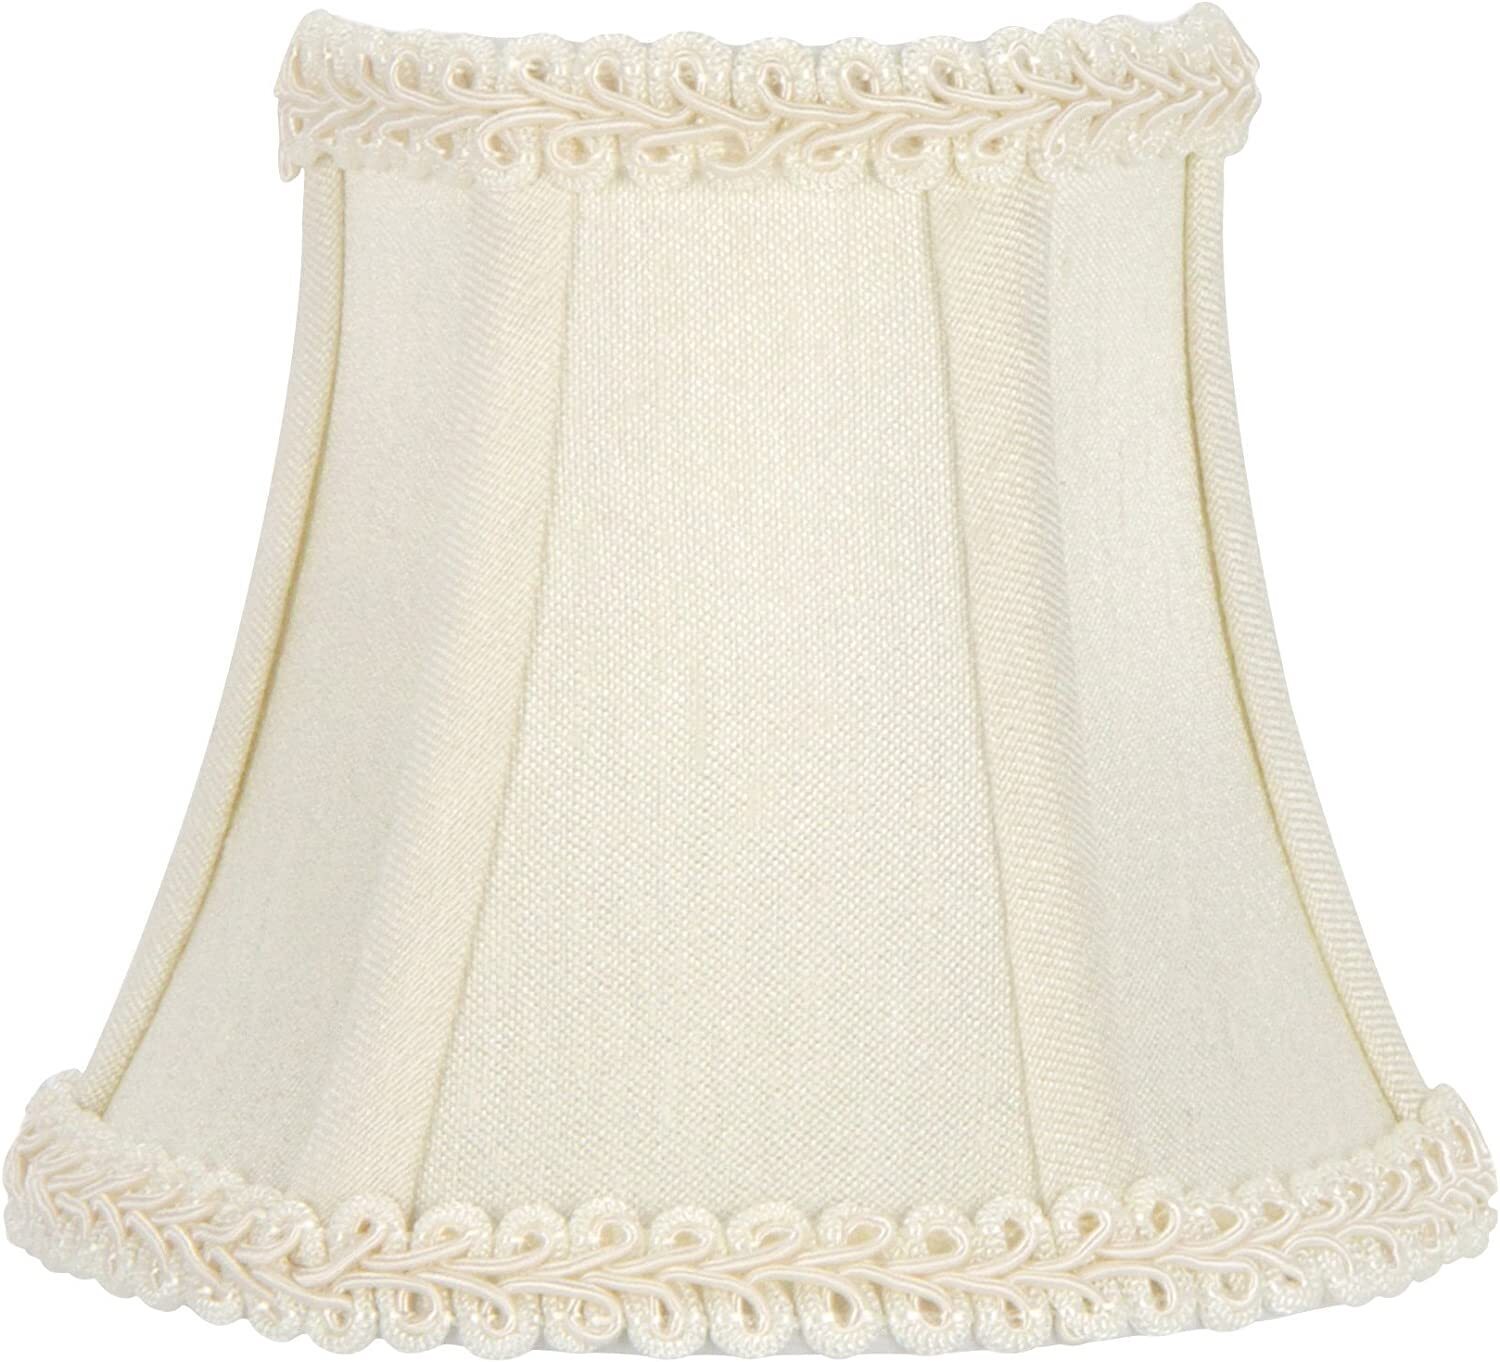 Half lamp shade for wall sconce